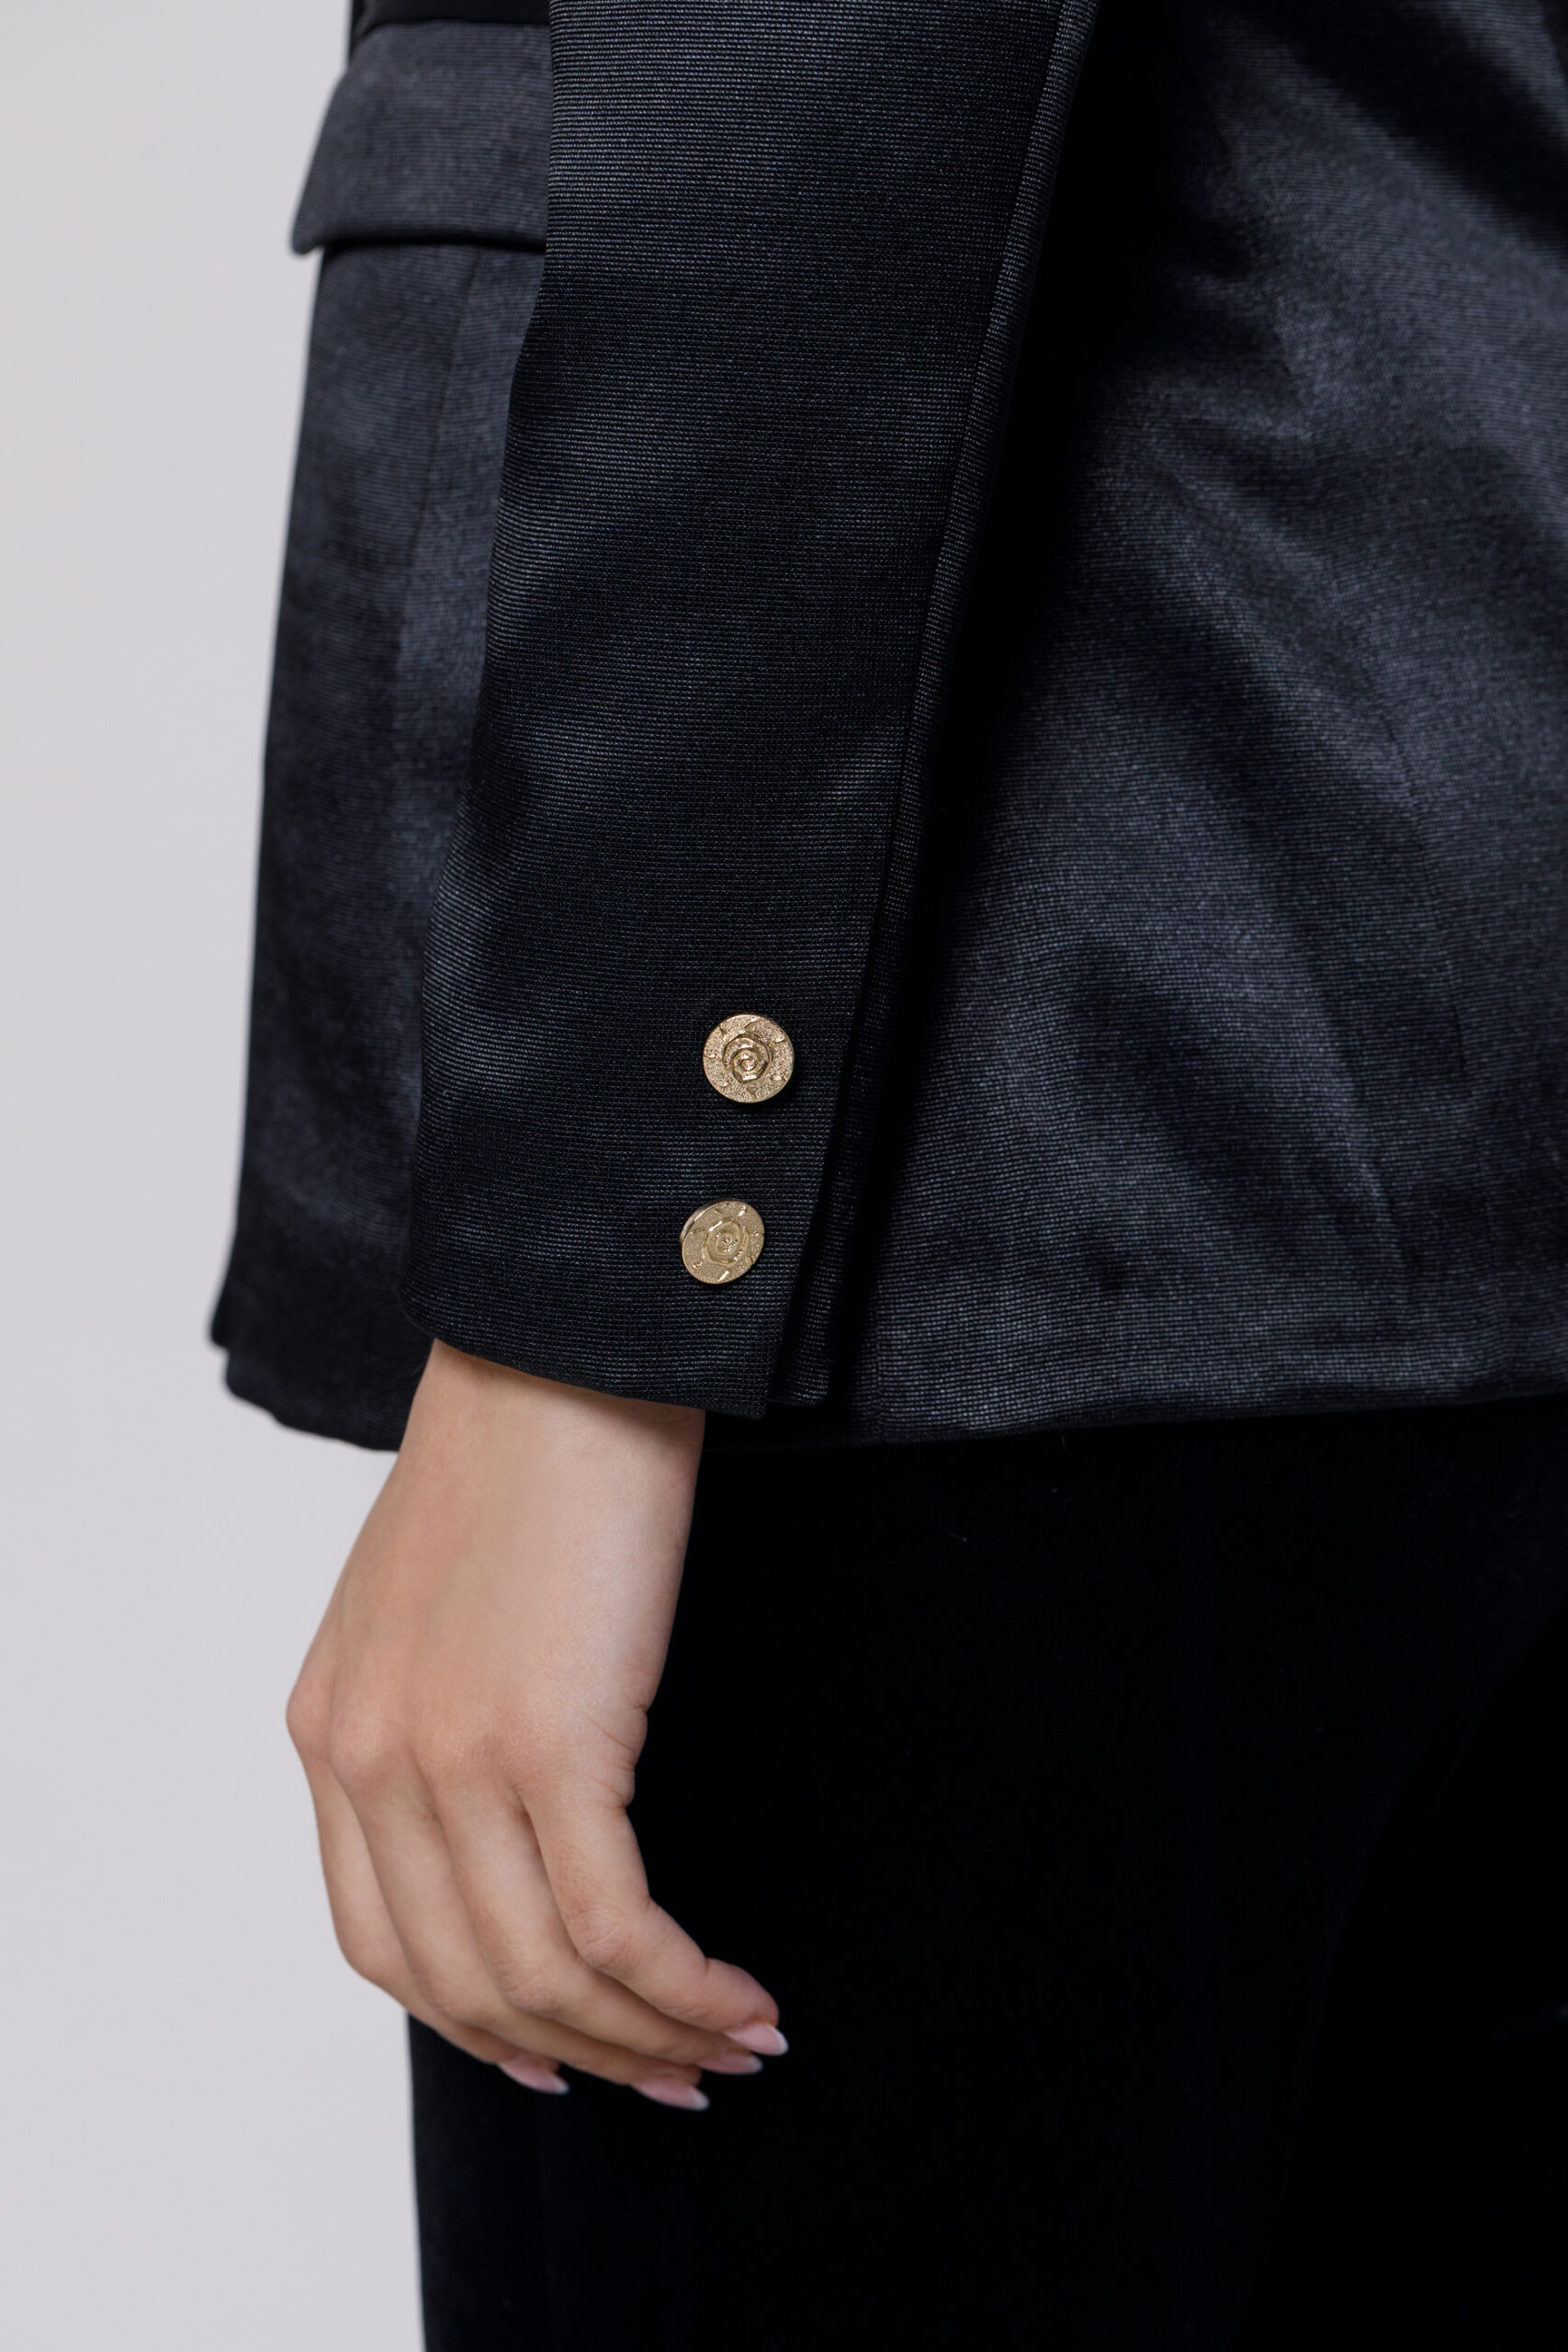 MARISOL black jacket with two rows of buttons. Natural fabrics, original design, handmade embroidery